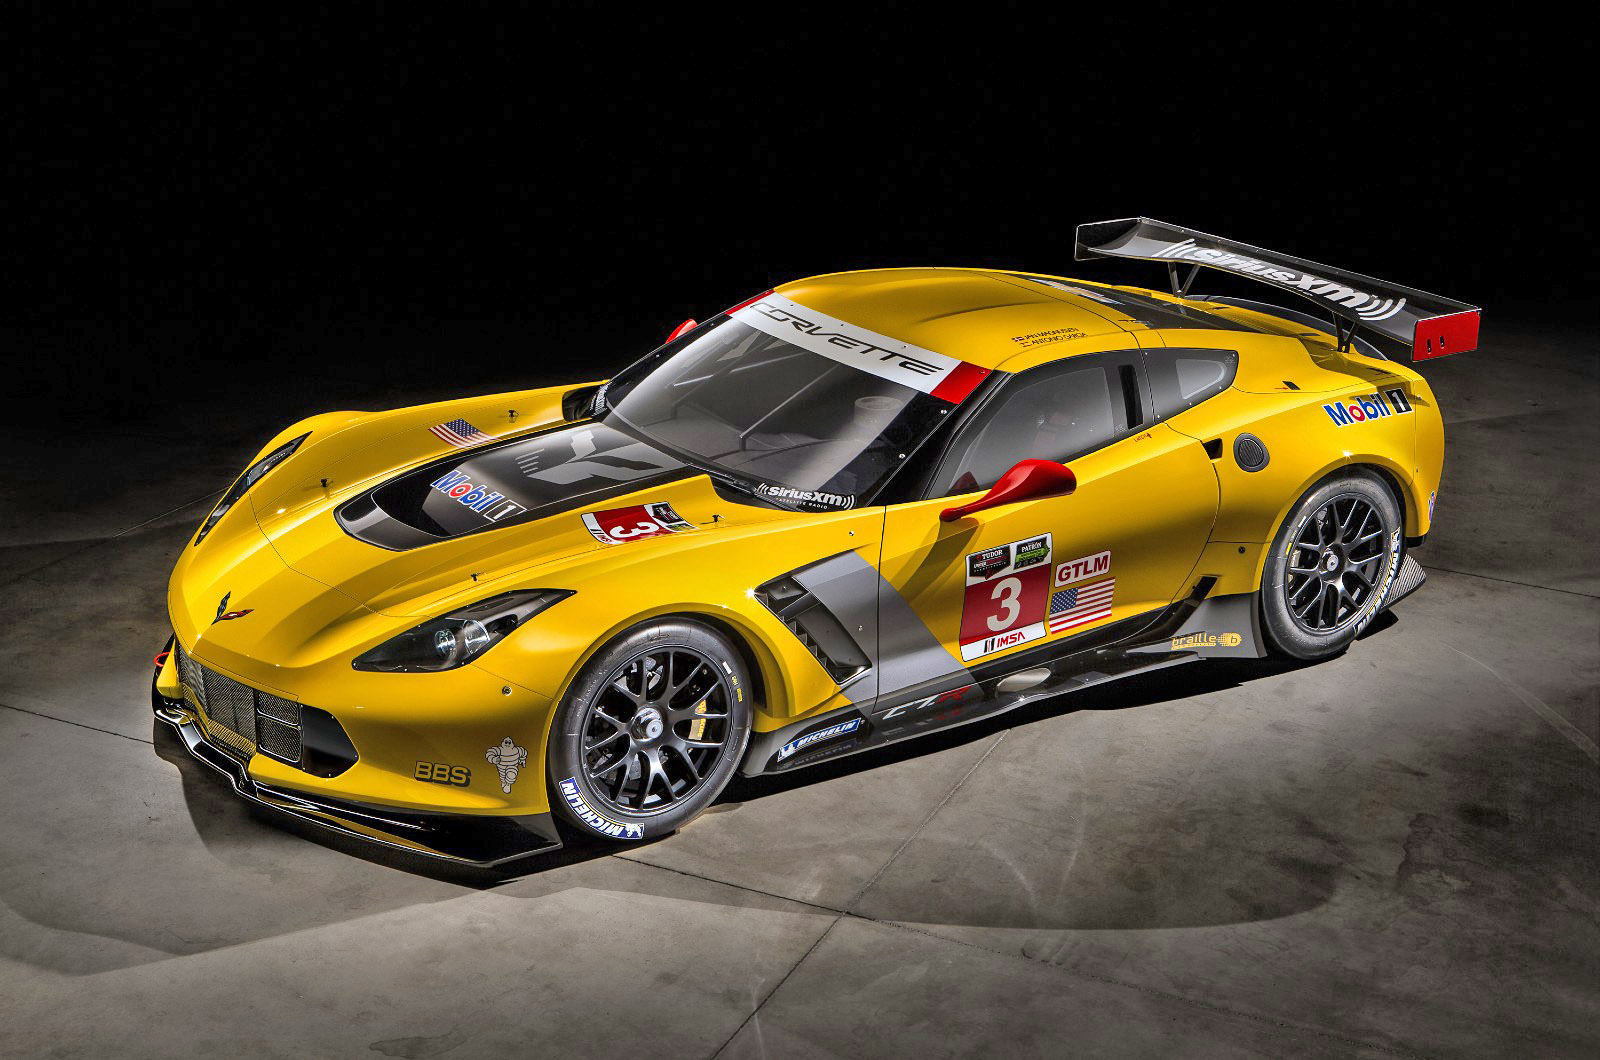 <p>Corvette Racing is an official auto racing team established in 1999 by GM and Pratt & Miller, dedicated to international sports car racing with Chevrolet Corvette models. The team stands out with its iconic yellow livery, its passionate American fanbase, and its use of four generations of the Corvette.</p><p>Corvette Racing has contributed to the design of the Corvette by refining it for competition, most recently with the Corvette C8.R. The team boasts an impressive track record with nine victories at the 24 Hours of Le Mans, four a the 24 Hours of Daytona, and many notable finishes in the American Le Mans Series and the IMSA SportsCar Championship. The team will conclude its factory operation in 2023, shifting focus to customer teams with the new Chevrolet Corvette Z06 GT3.R.</p>